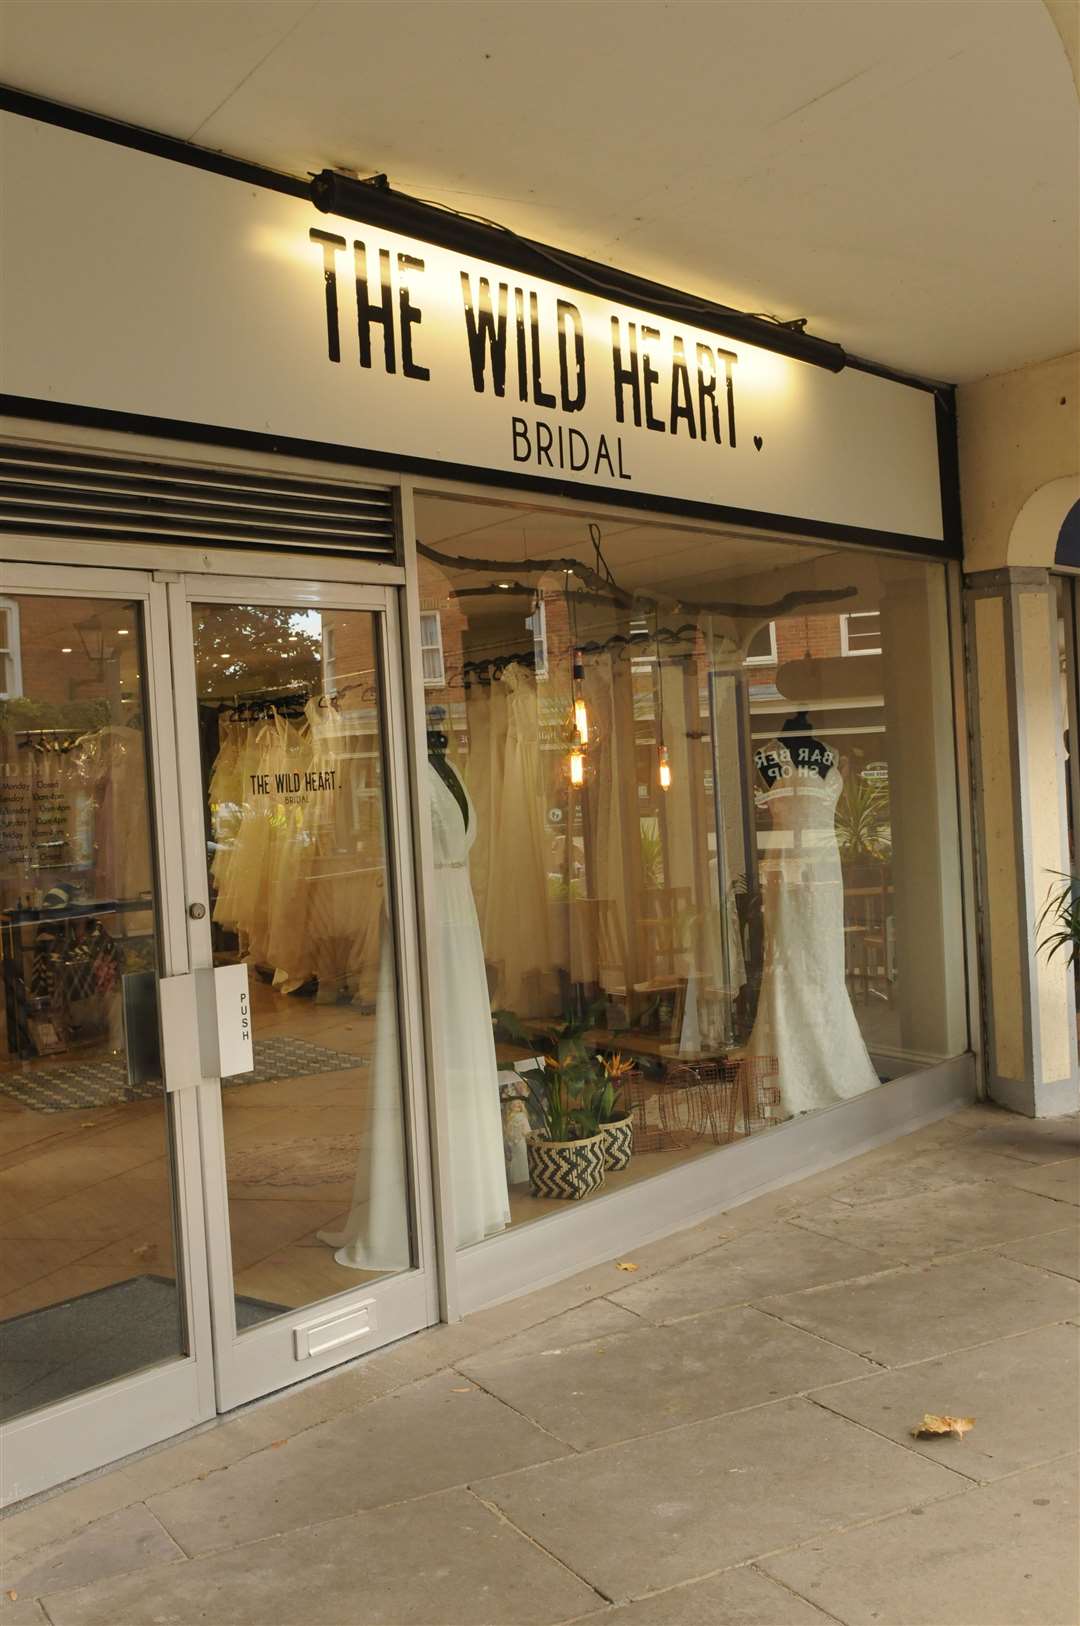 They have moved into what was Wild Heart Bridal